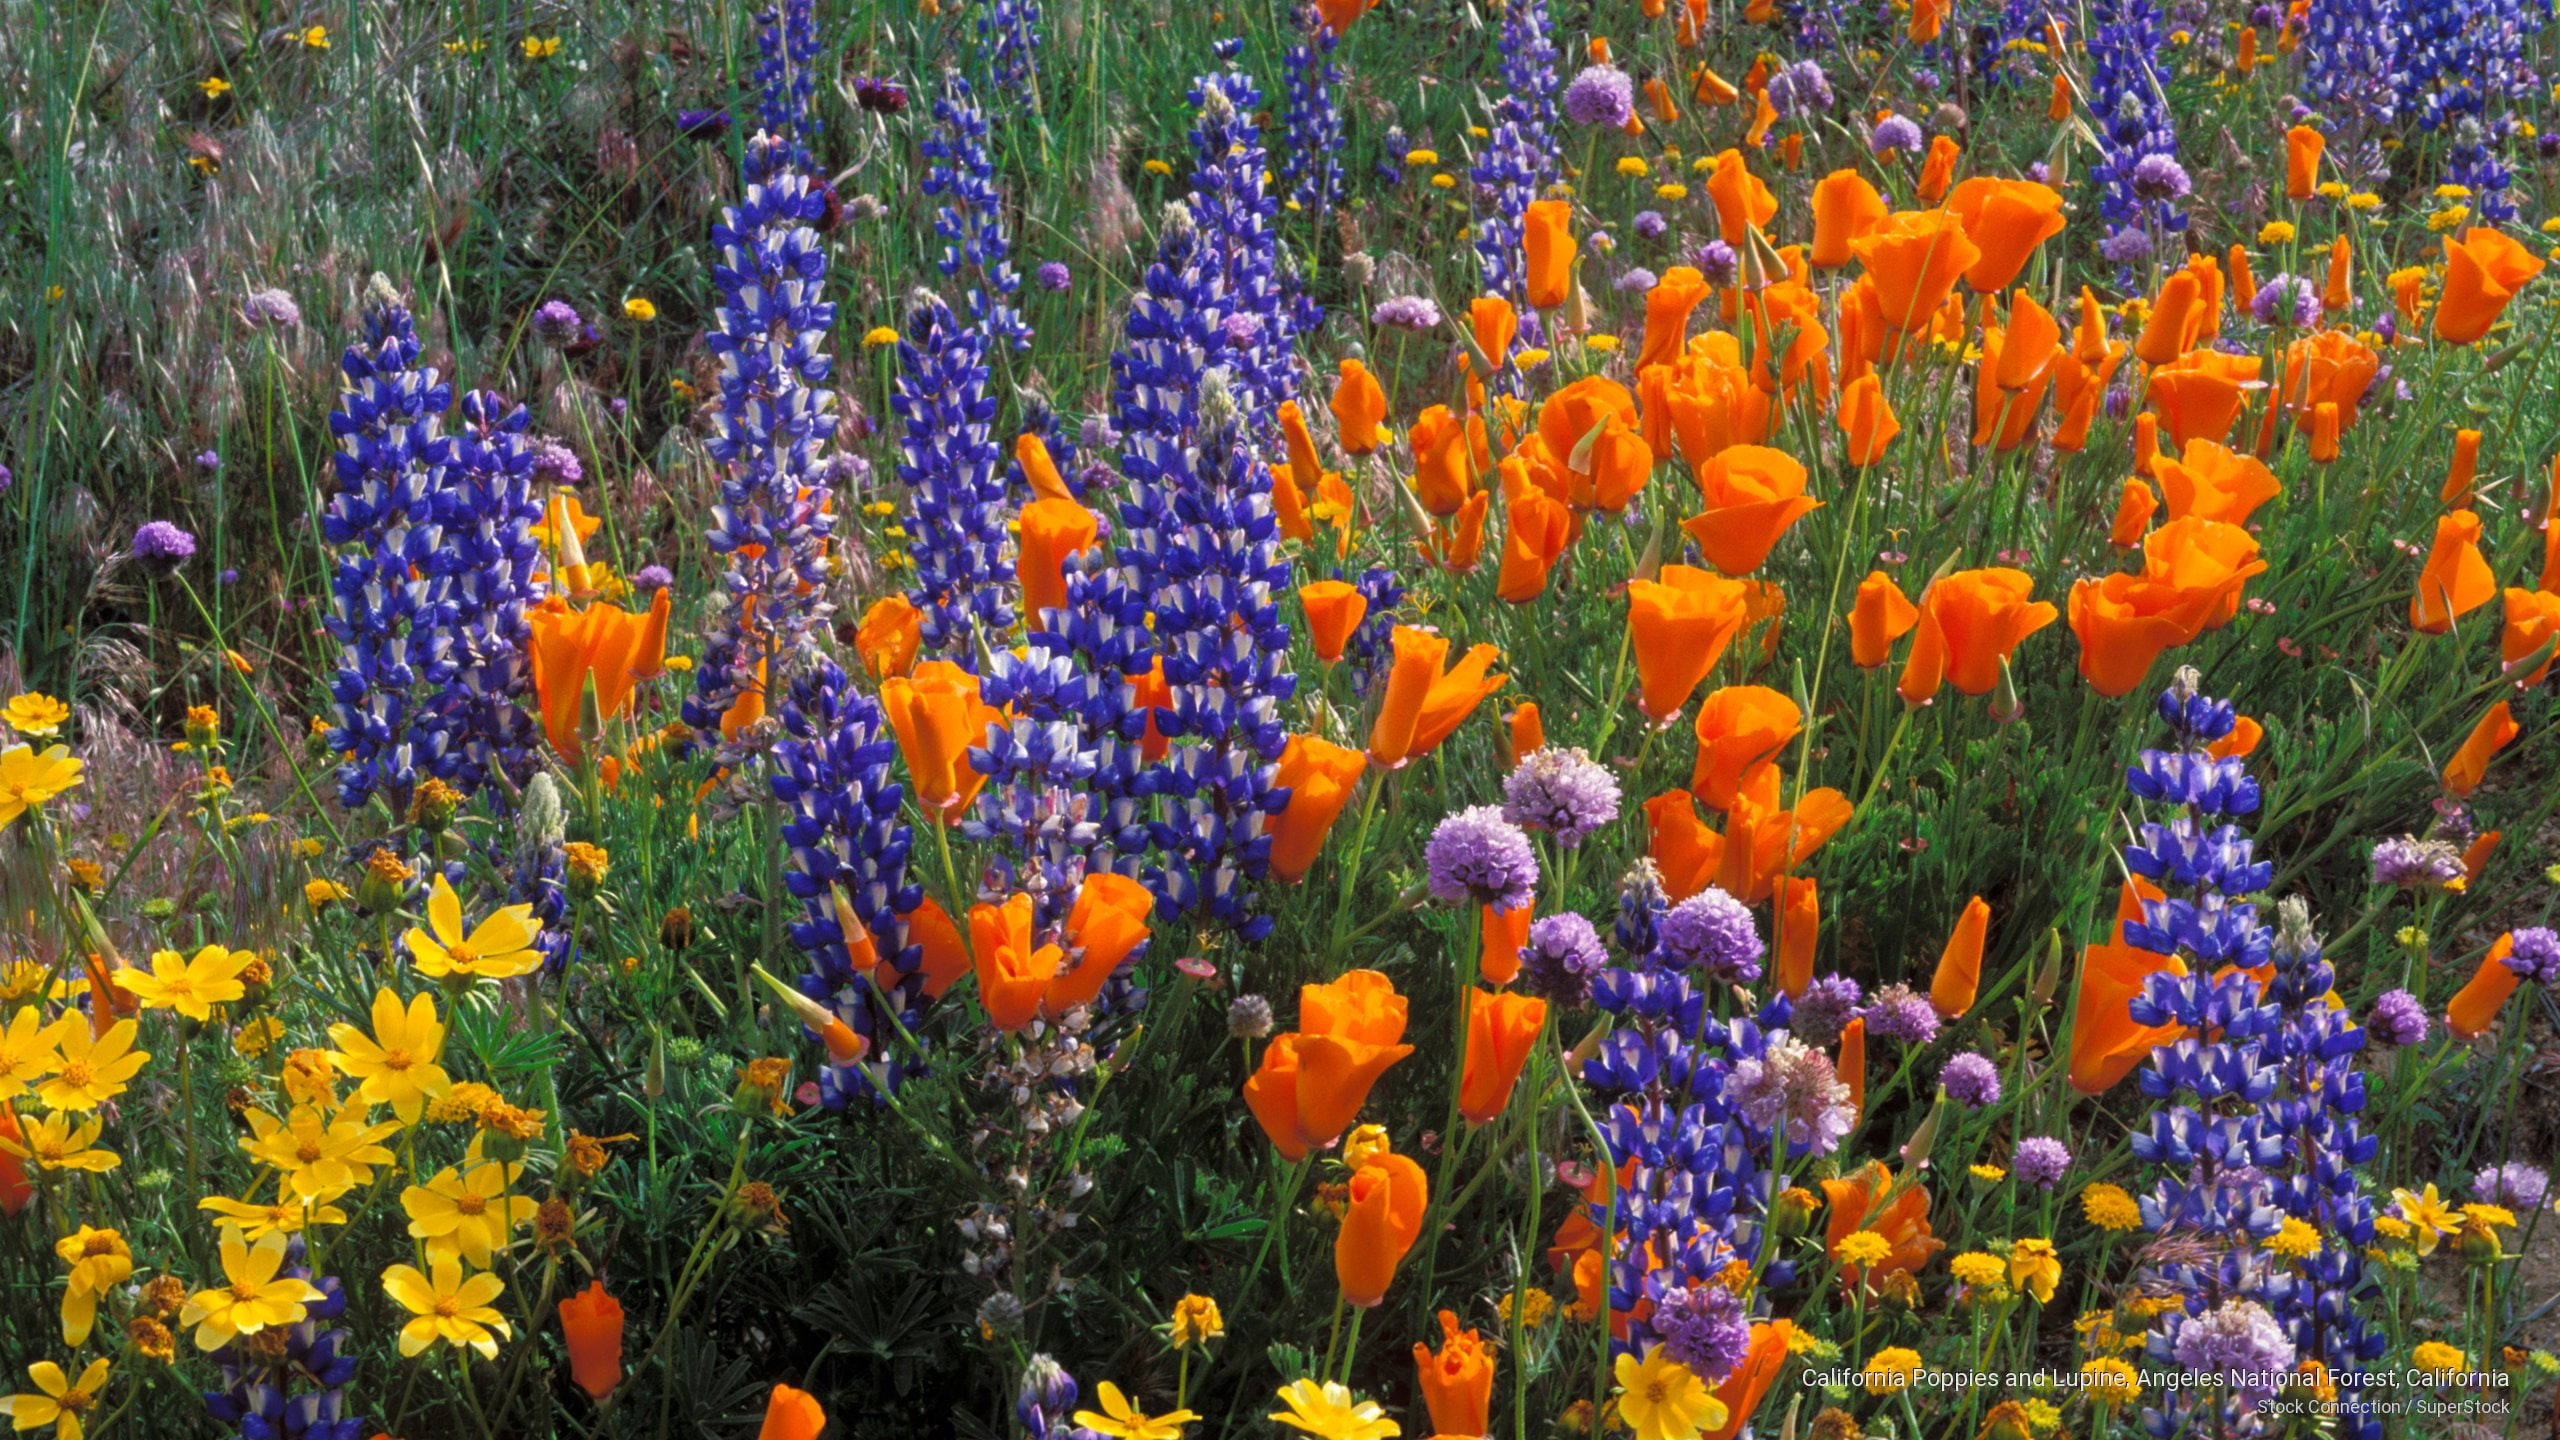 California Poppies and Lupine, Angeles National Forest, California